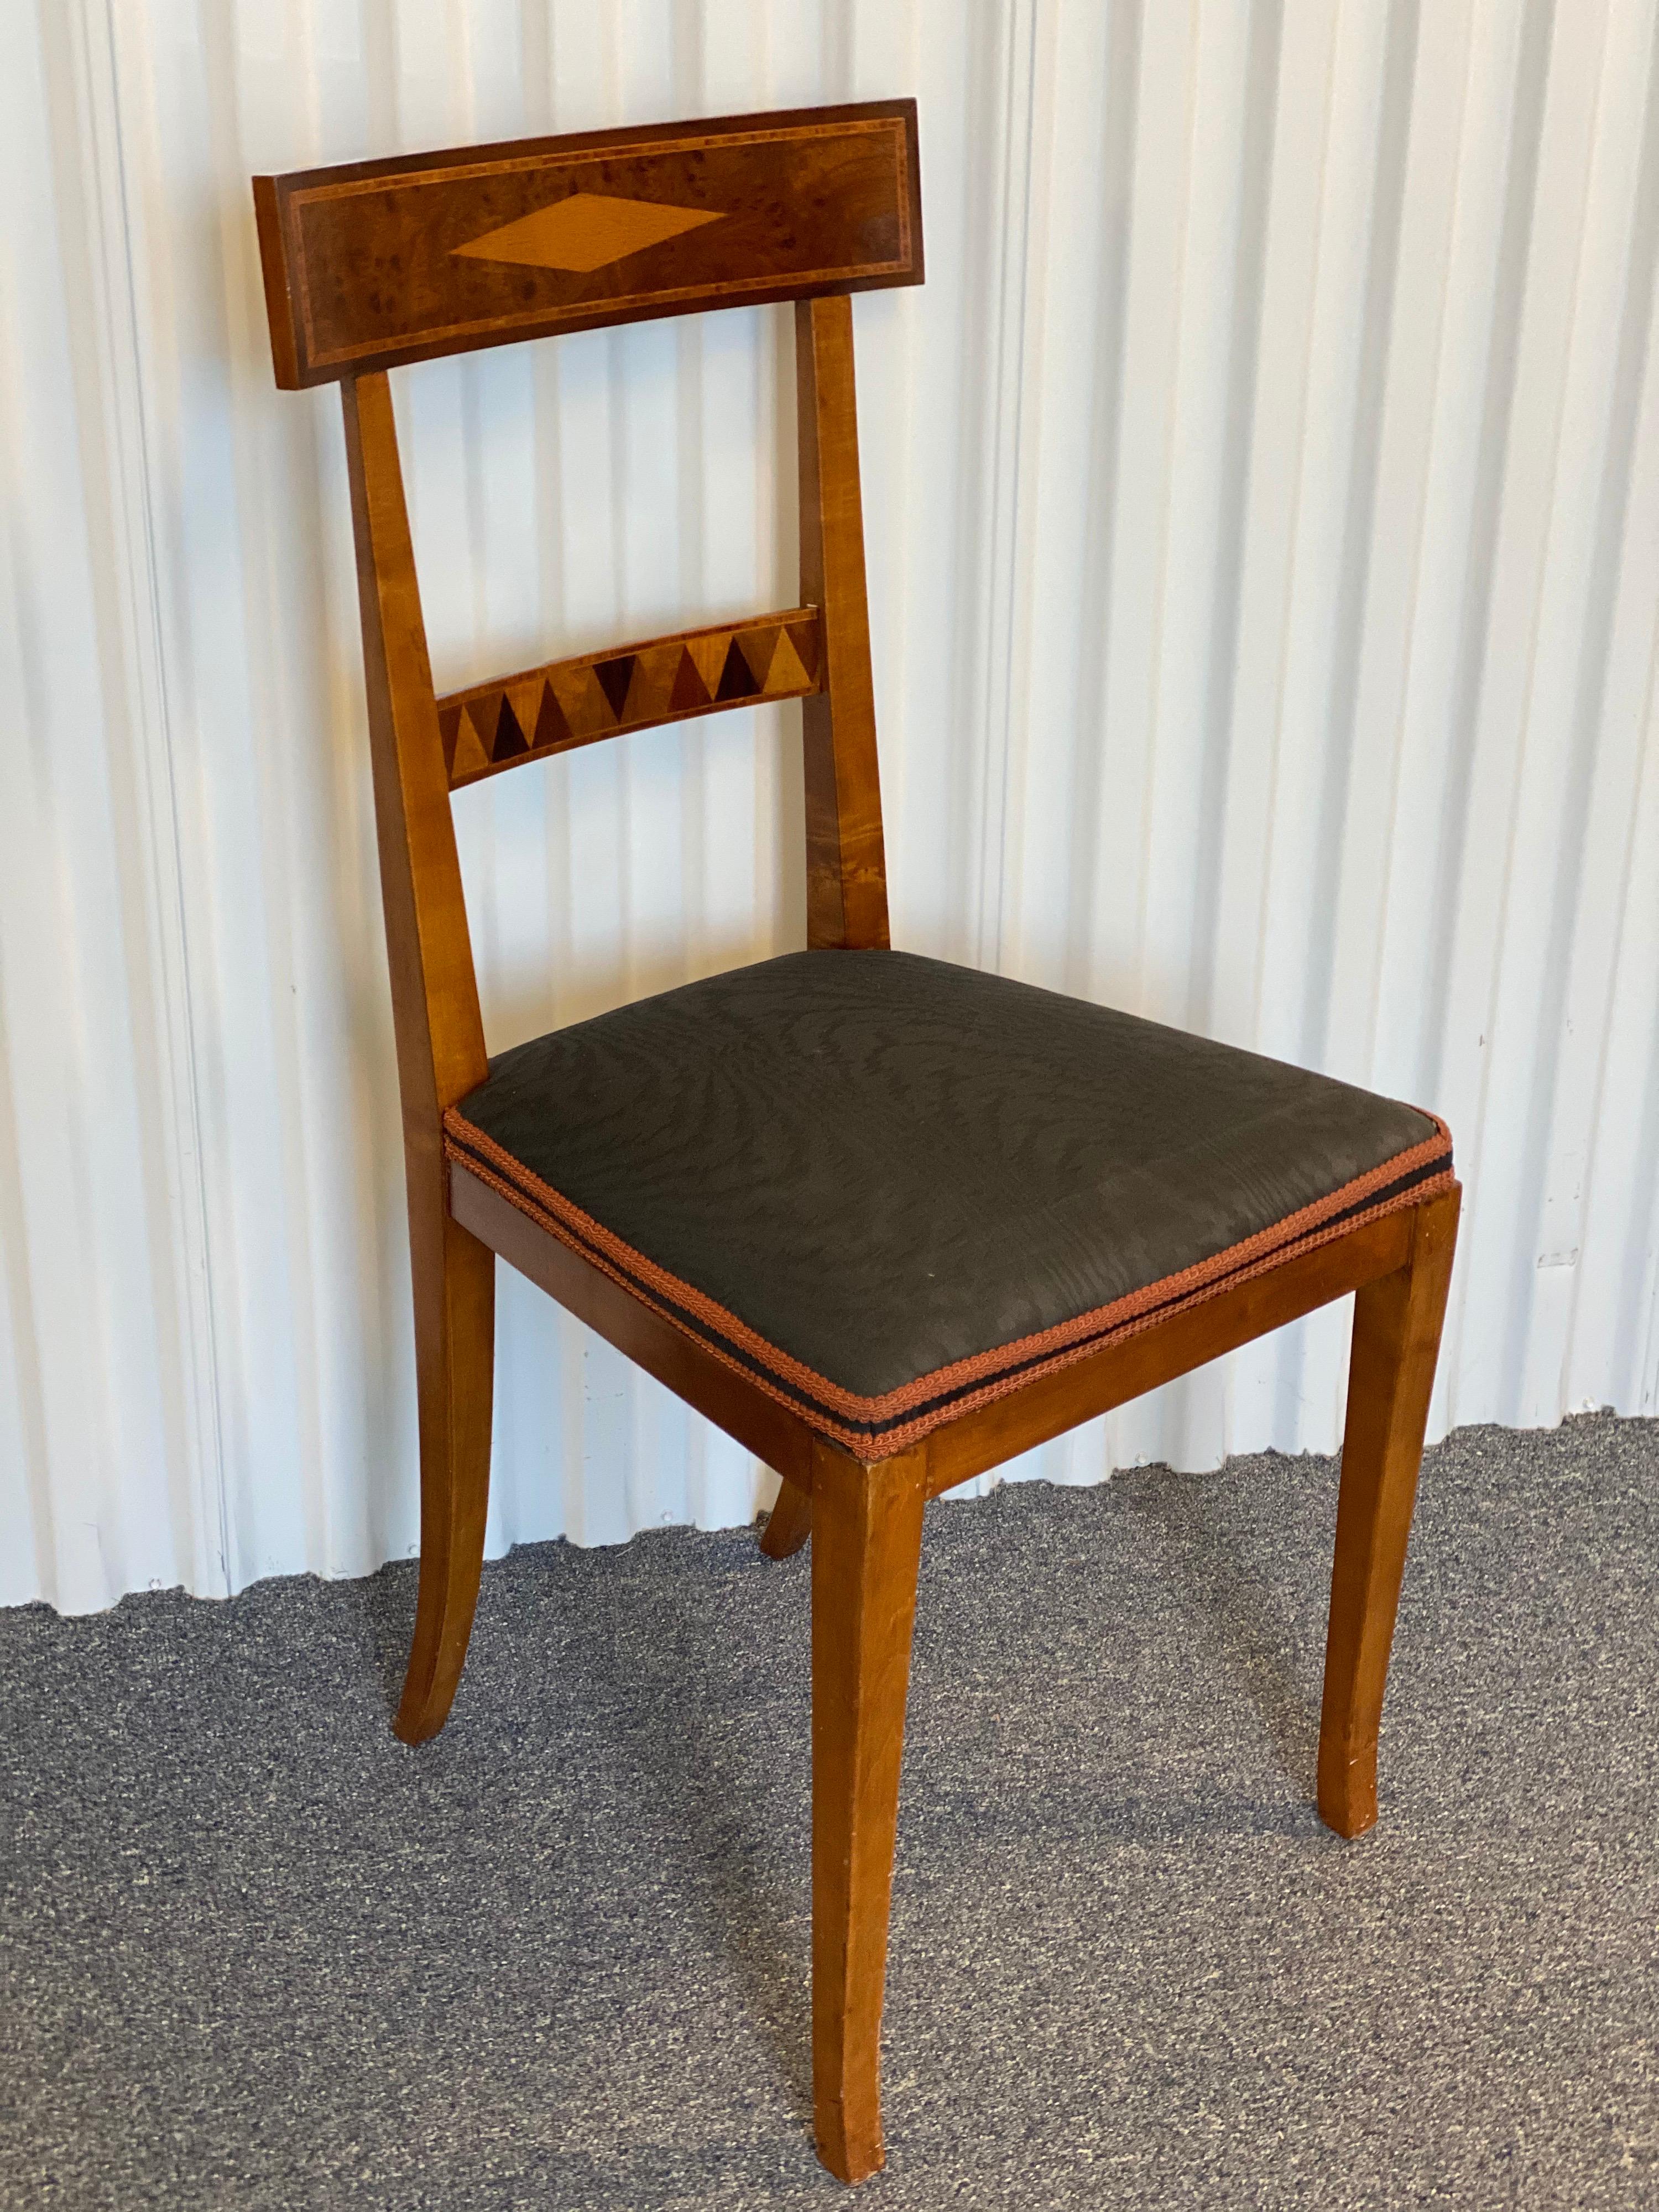 Continental neoclassical style mahogany side chair. Made in beautiful mahogany wood with an upholstered blue-gray-colored moire silk seat. This chair has a burlwood and fruitwood parquet design on the front cross rail as well as a simpler diamond